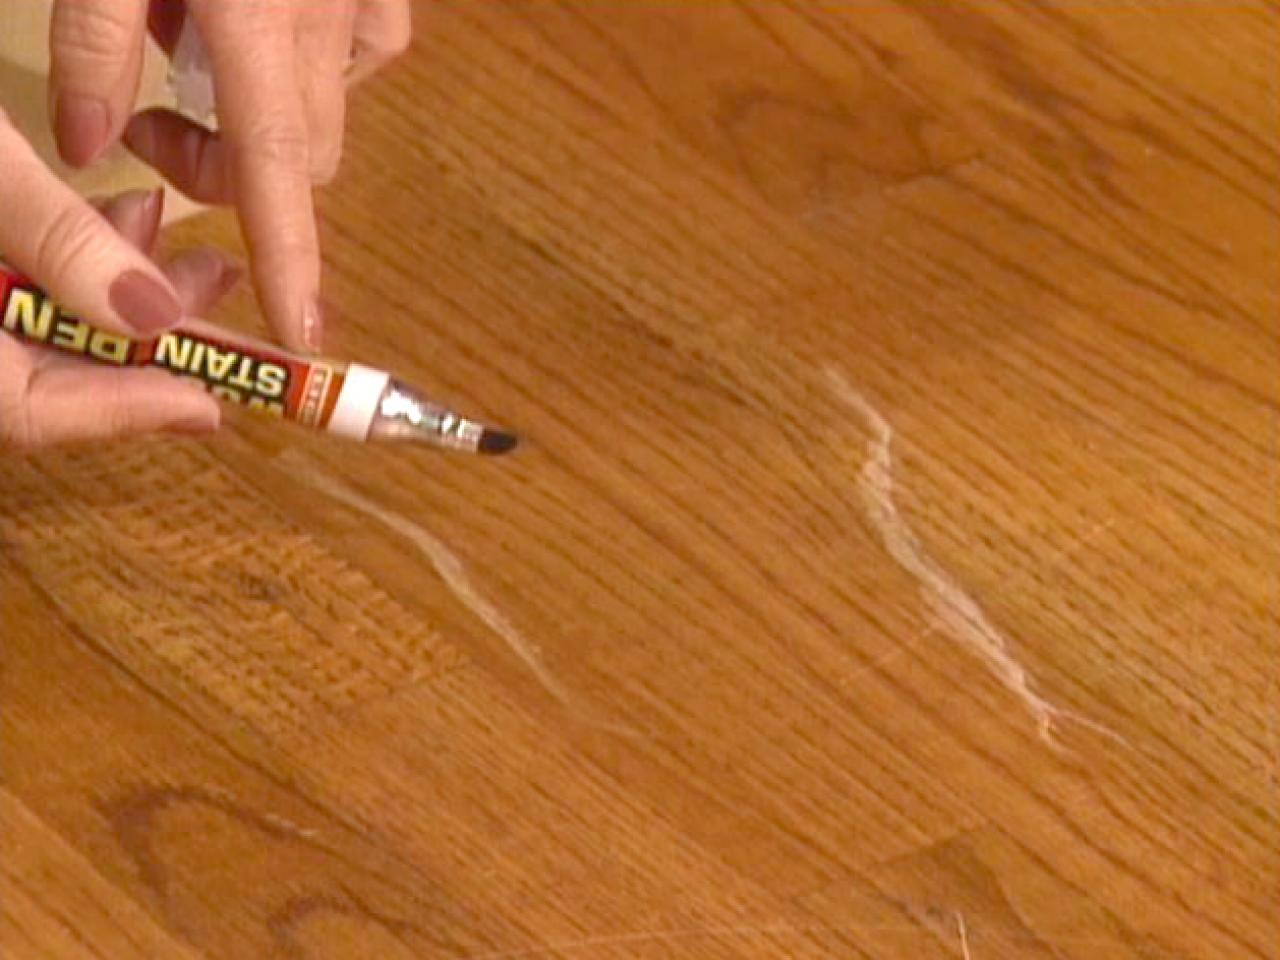 How To Touch Up Wood Floors Tos Diy, How To Clean Scuff Marks On Hardwood Floors